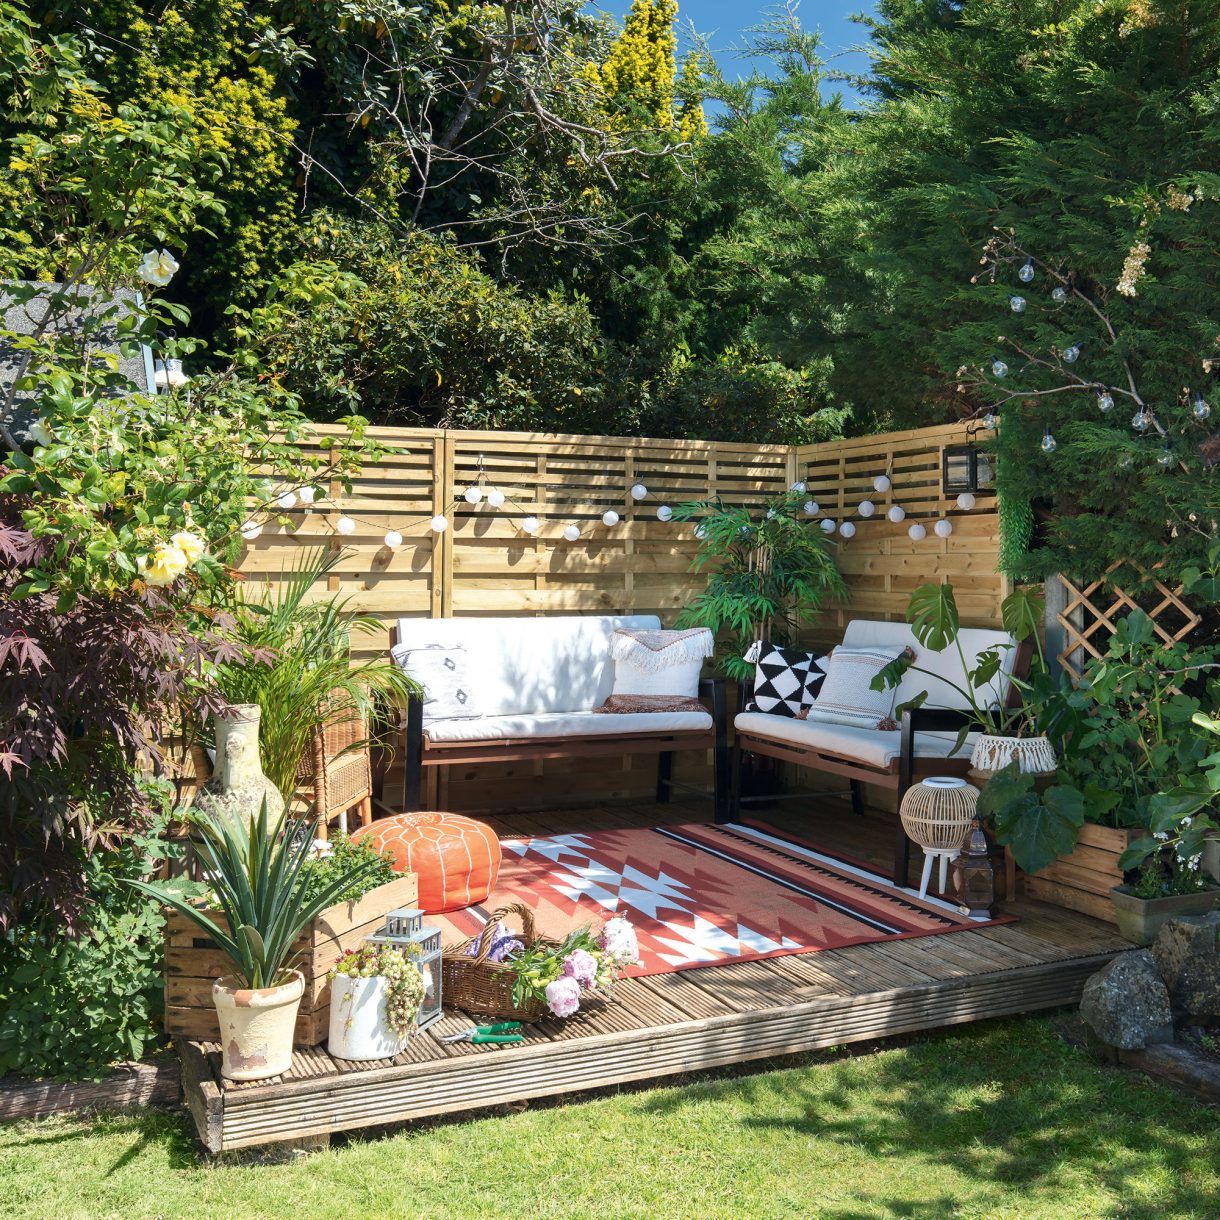 Creating a Charming Oasis: Ideas for Decorating Your Small Garden